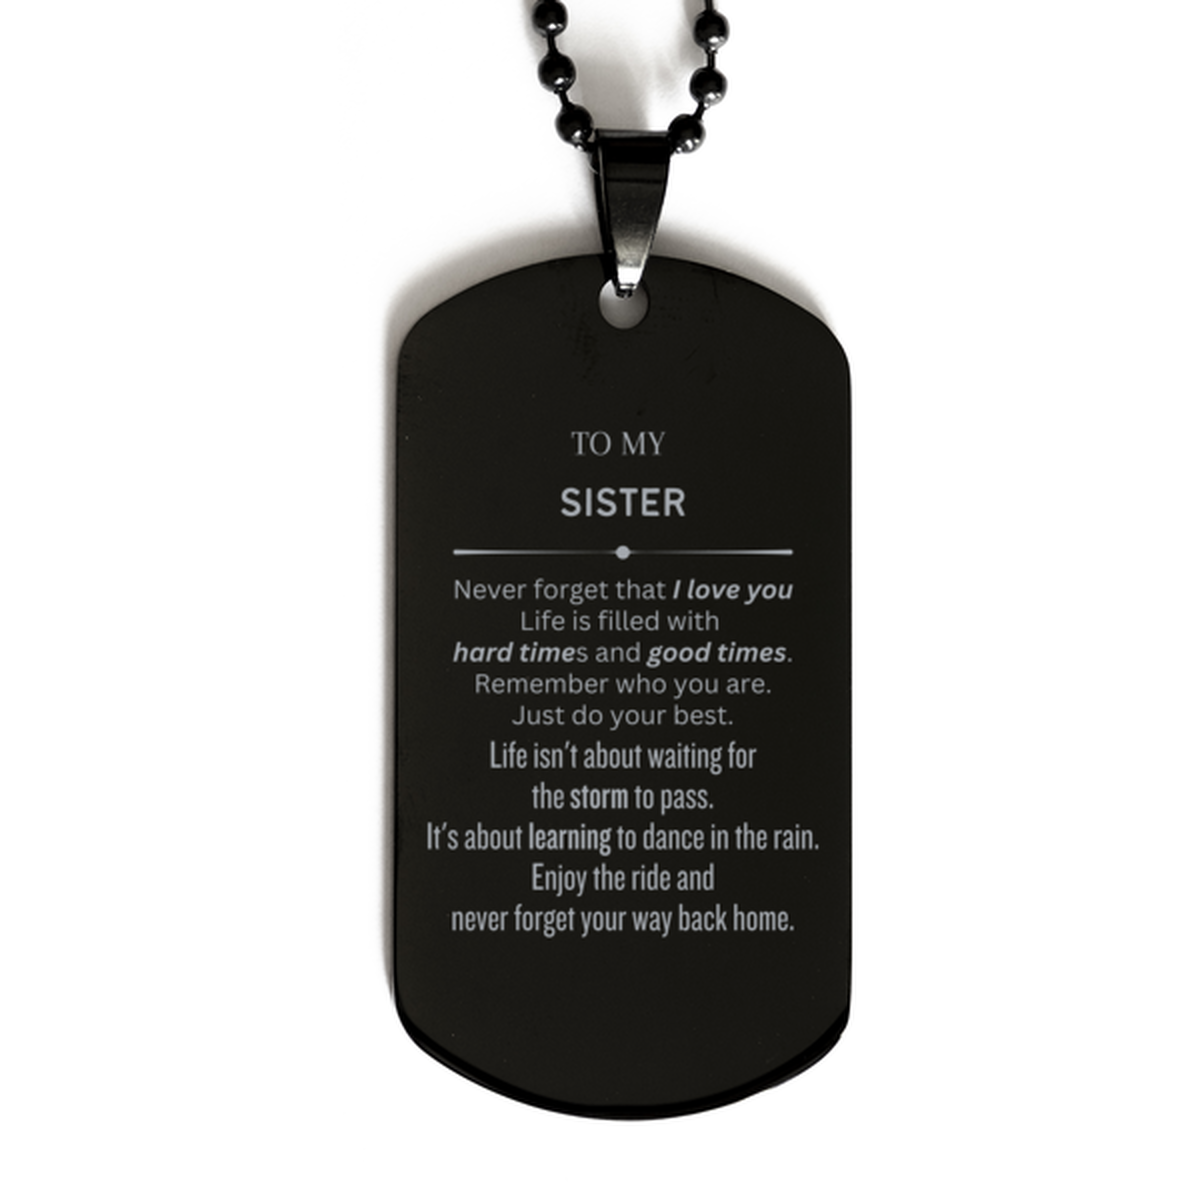 Christmas Sister Black Dog Tag Gifts, To My Sister Birthday Thank You Gifts For Sister, Graduation Unique Gifts For Sister To My Sister Never forget that I love you life is filled with hard times and good times. Remember who you are. Just do your best